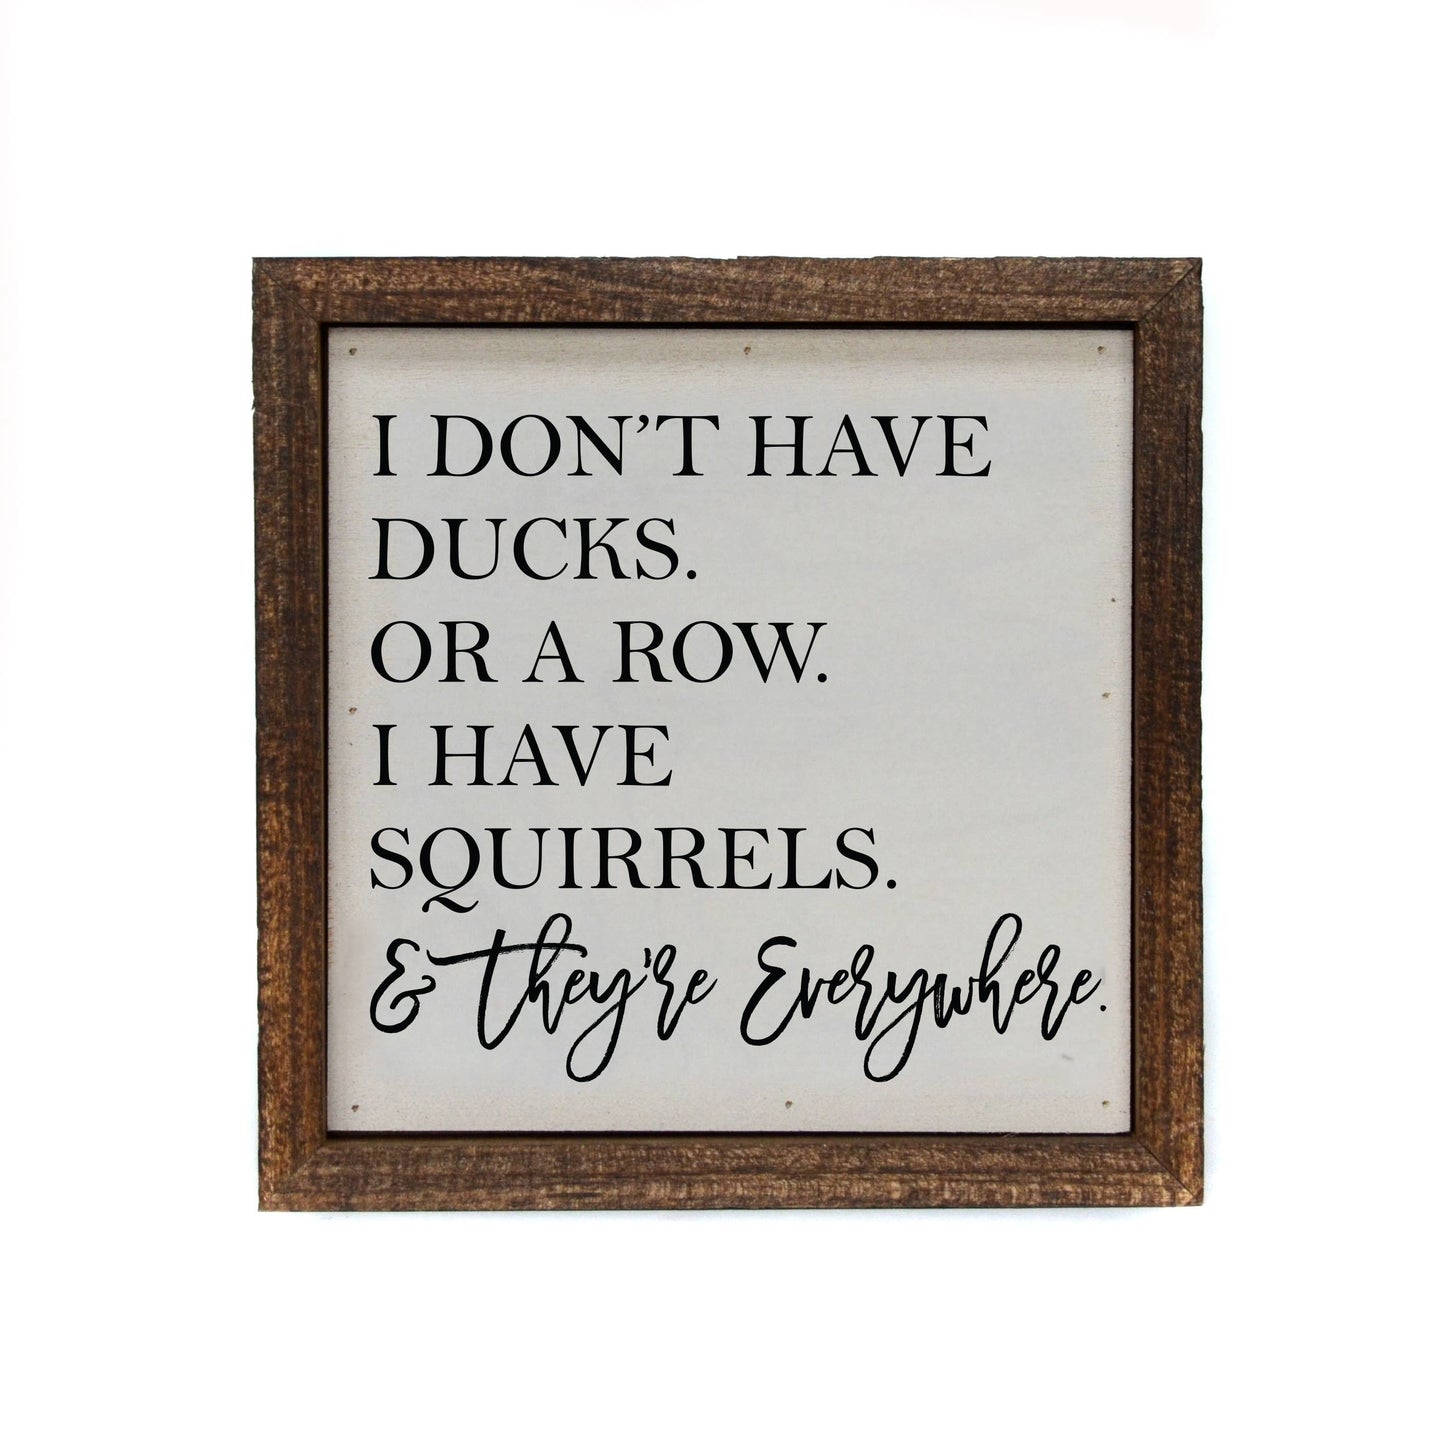 6x6 I Don't Have Ducks. Or A Row. I Have Squirrels Sign Core Driftless Studios